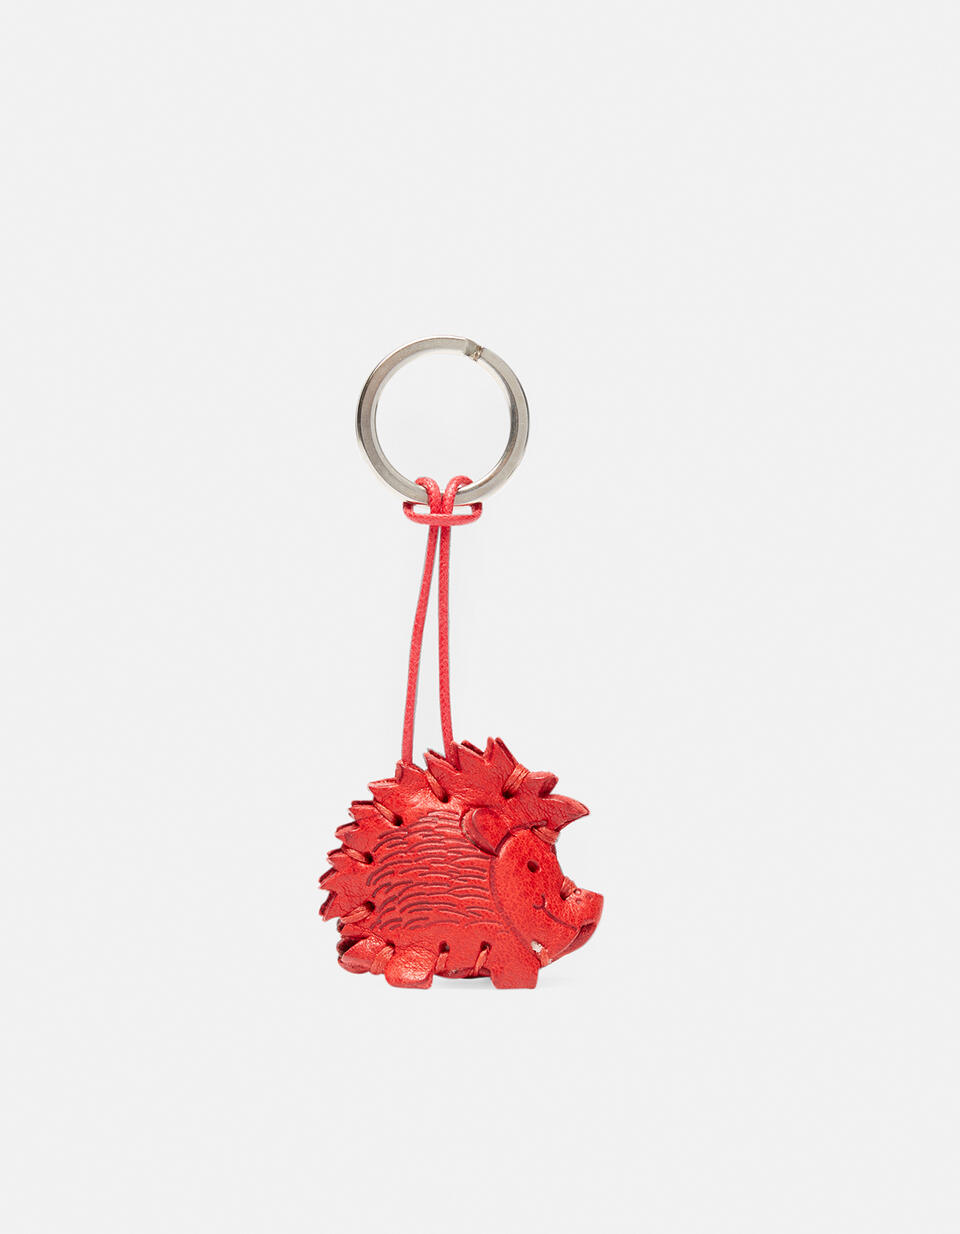 Curly leather keyring - Key holders - Women's Accessories | Accessories ROSSO - Key holders - Women's Accessories | AccessoriesCuoieria Fiorentina